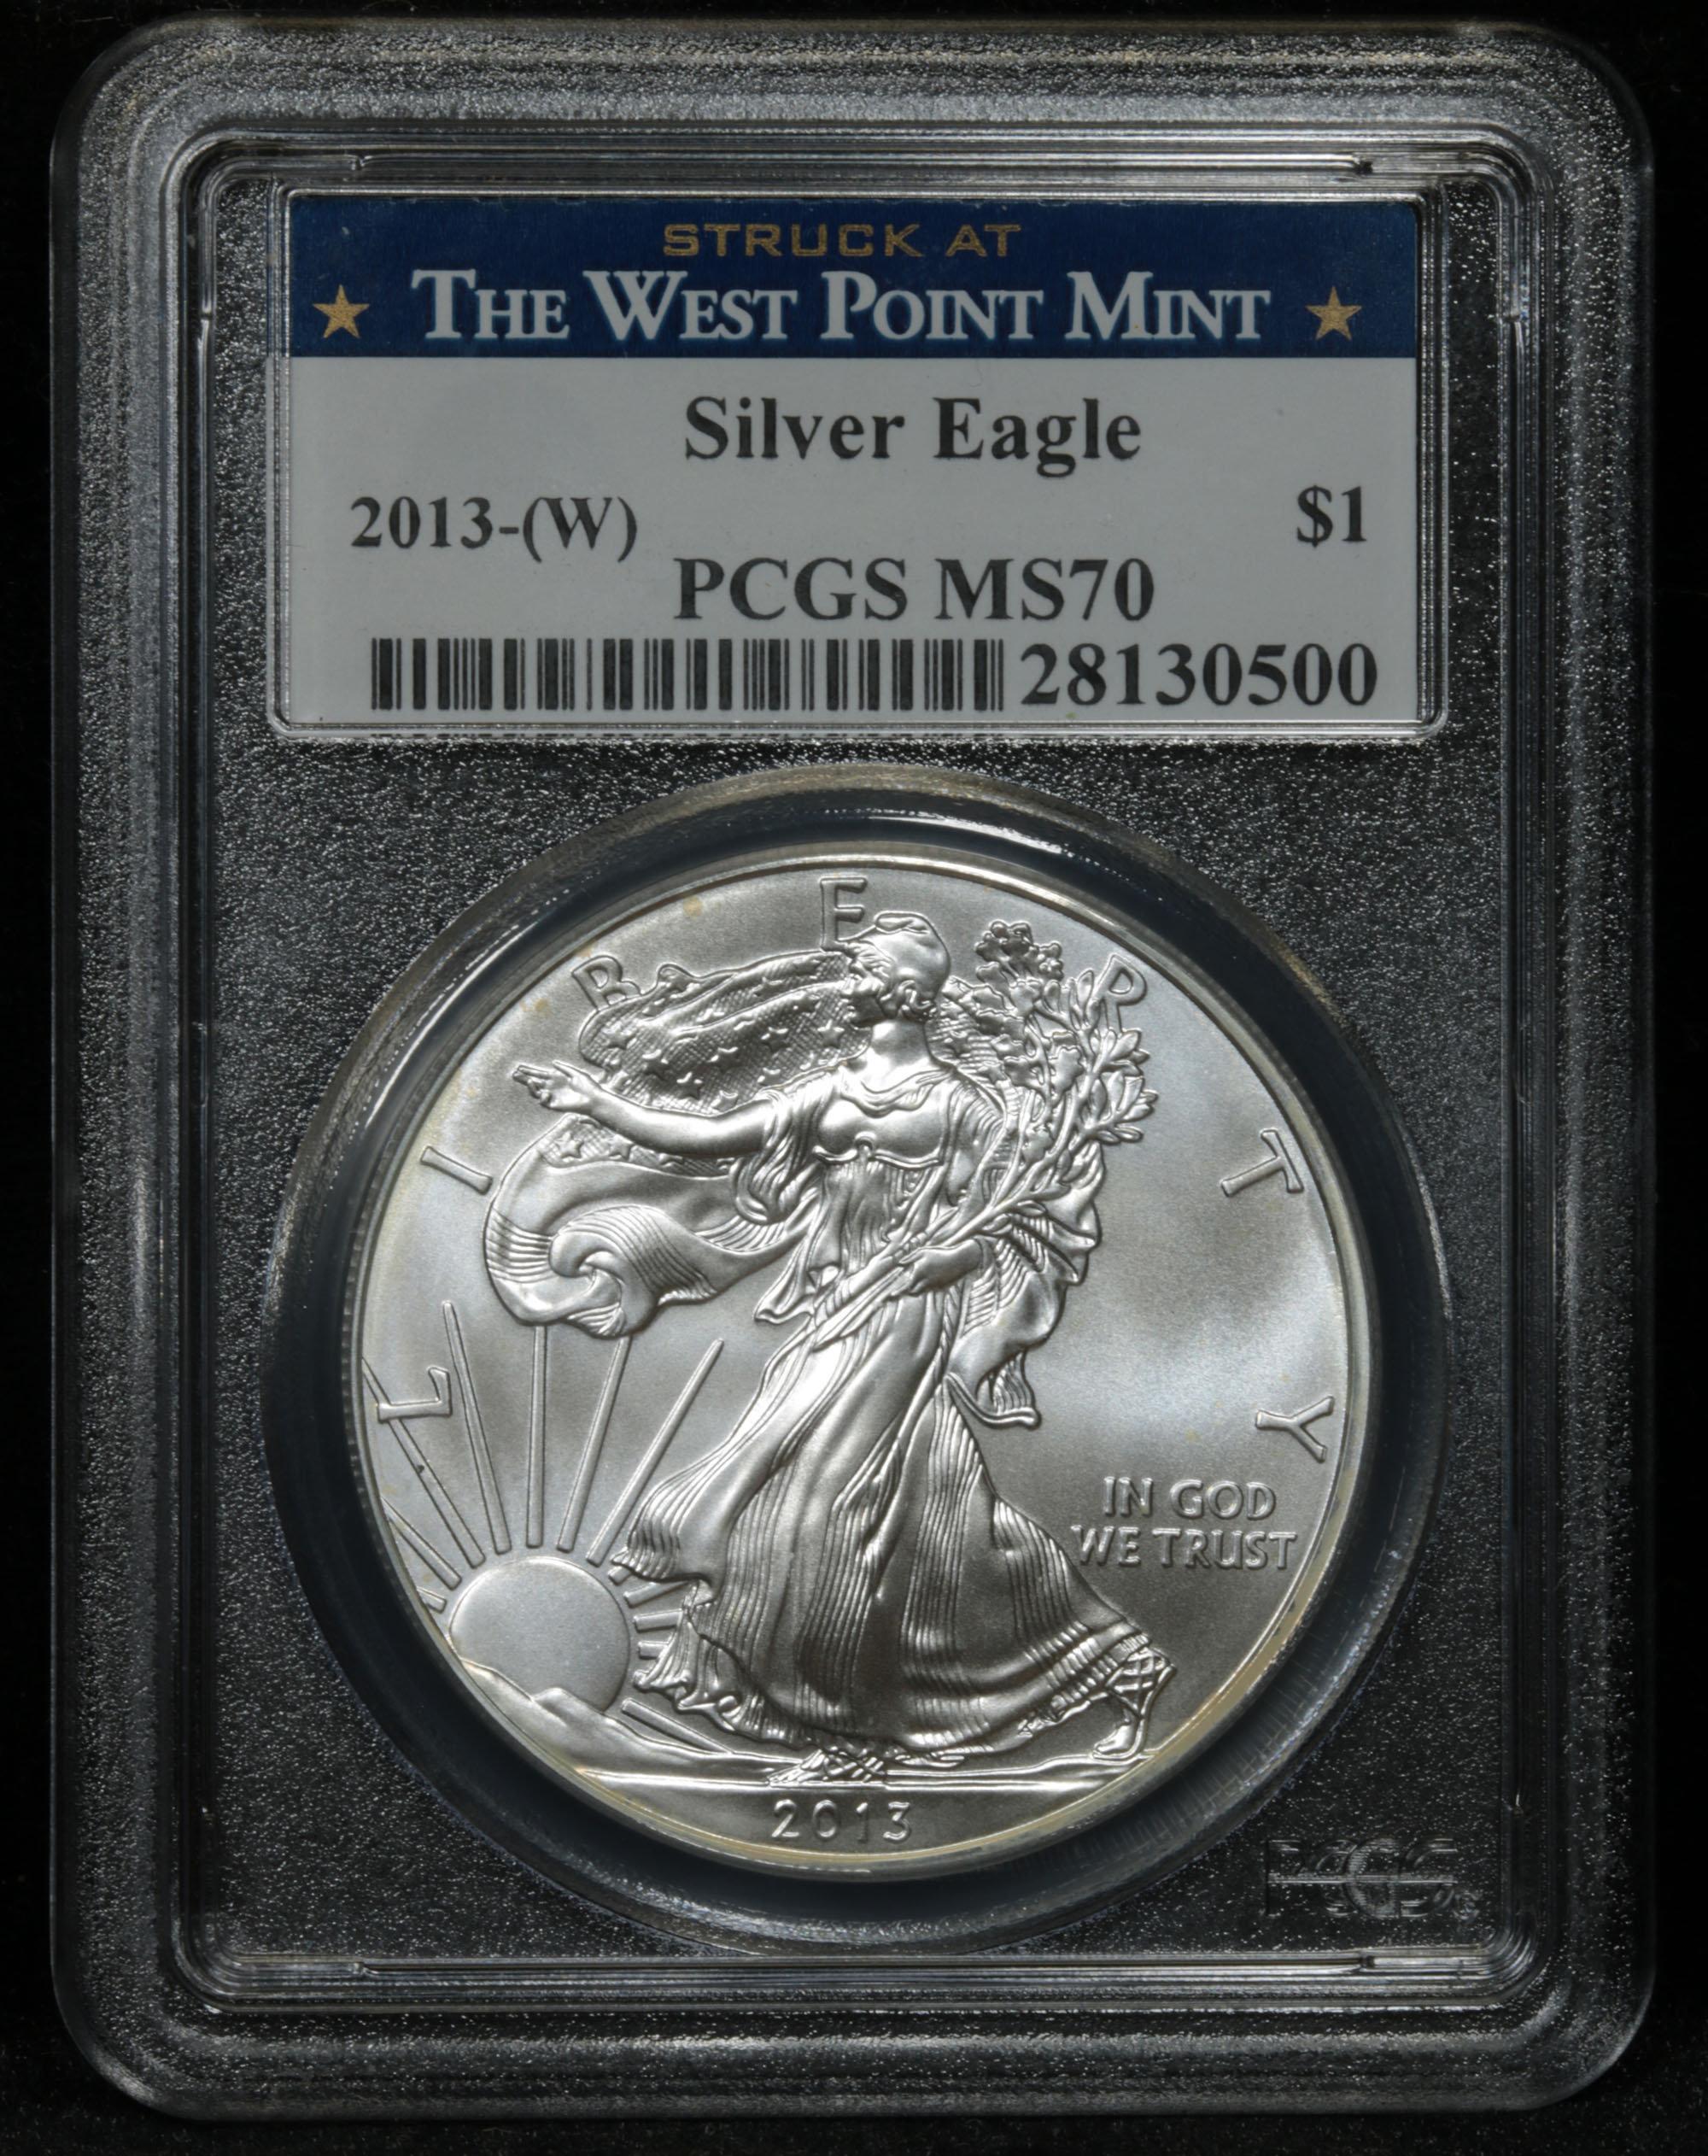 PCGS 2013-w Silver Eagle Dollar $1 Graded ms70 By PCGS